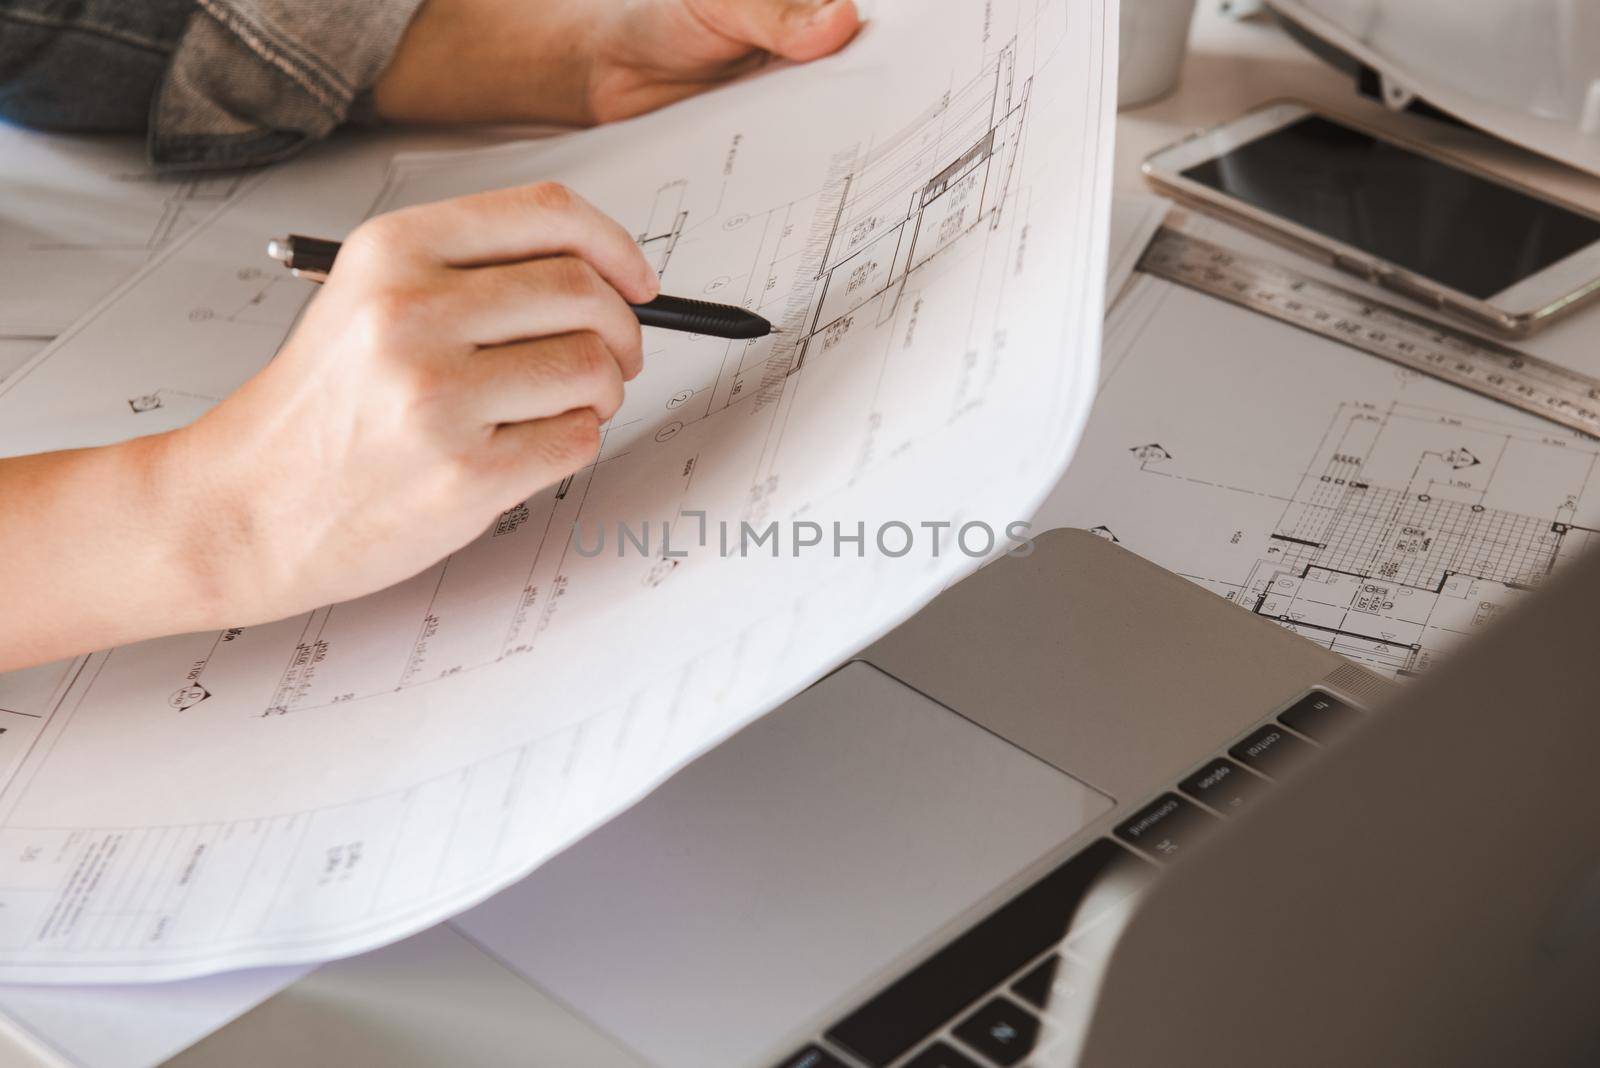 Engineers holding a pen pointing to a building on a blueprint and using a computer laptop to planning project schedule. Engineering and construction concept.